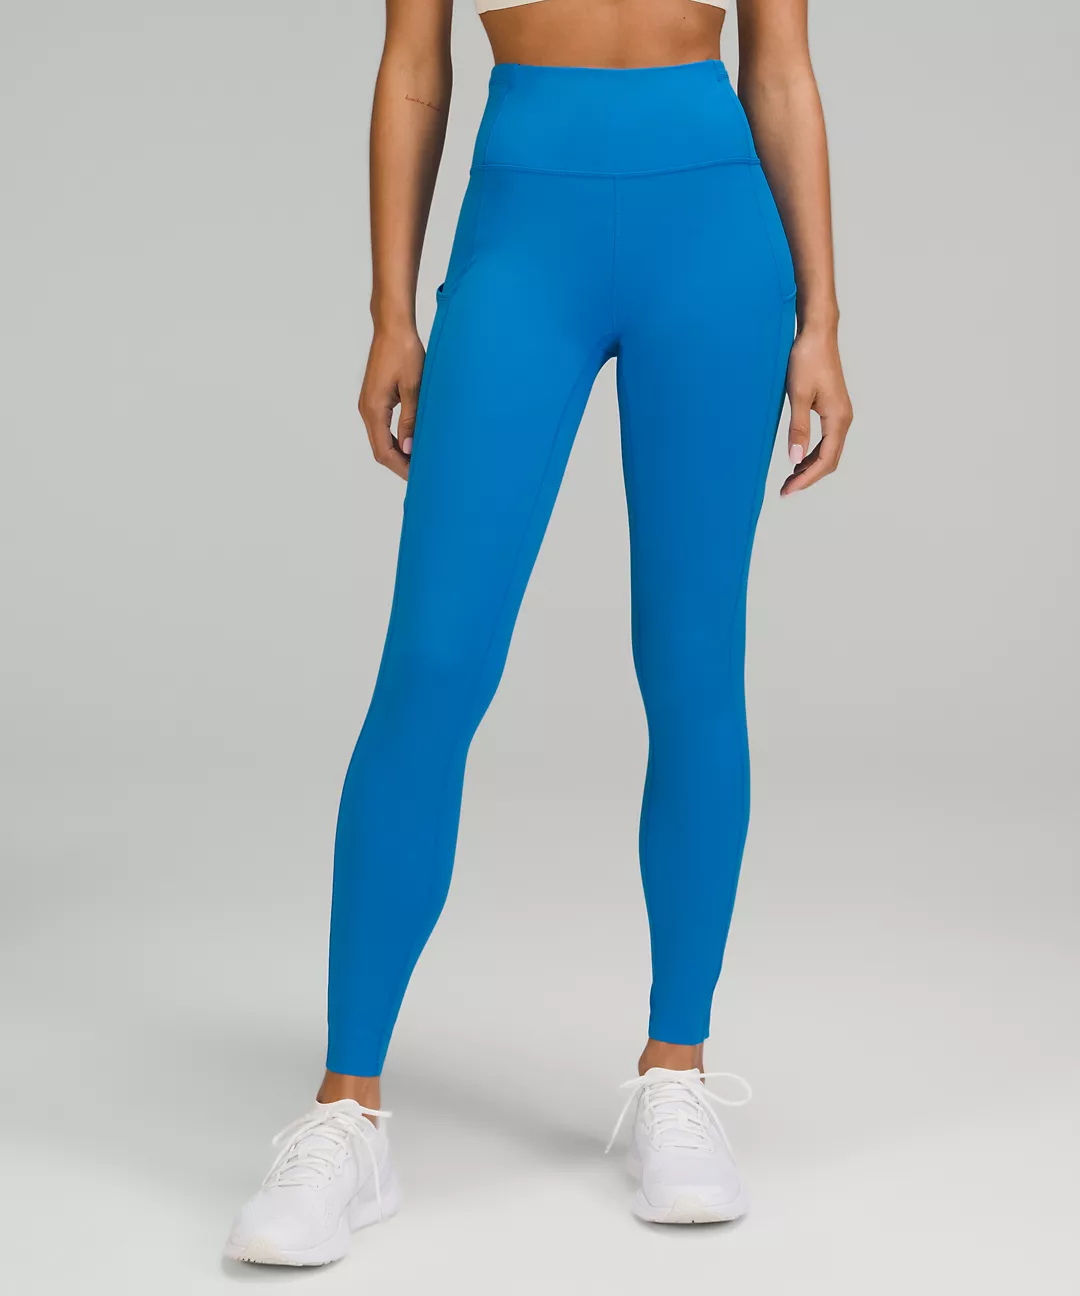 A lululemon Fast and Free High-Rise Tight 28"